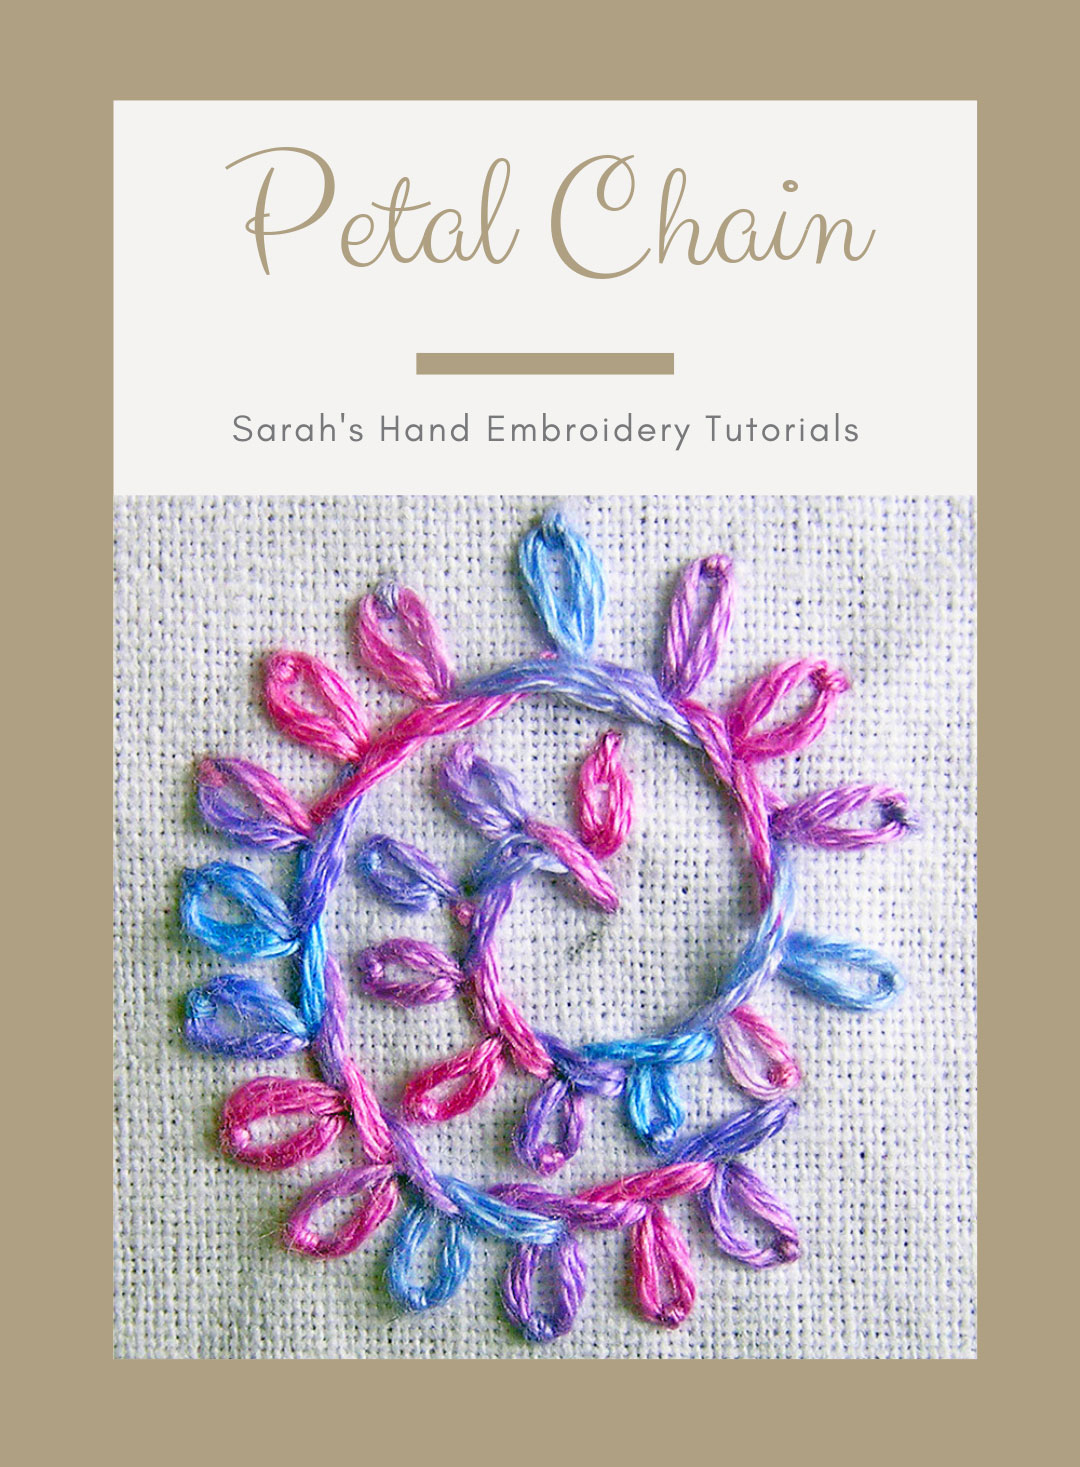 Beginner Friendly Patterns– Mindful Mantra Embroidery